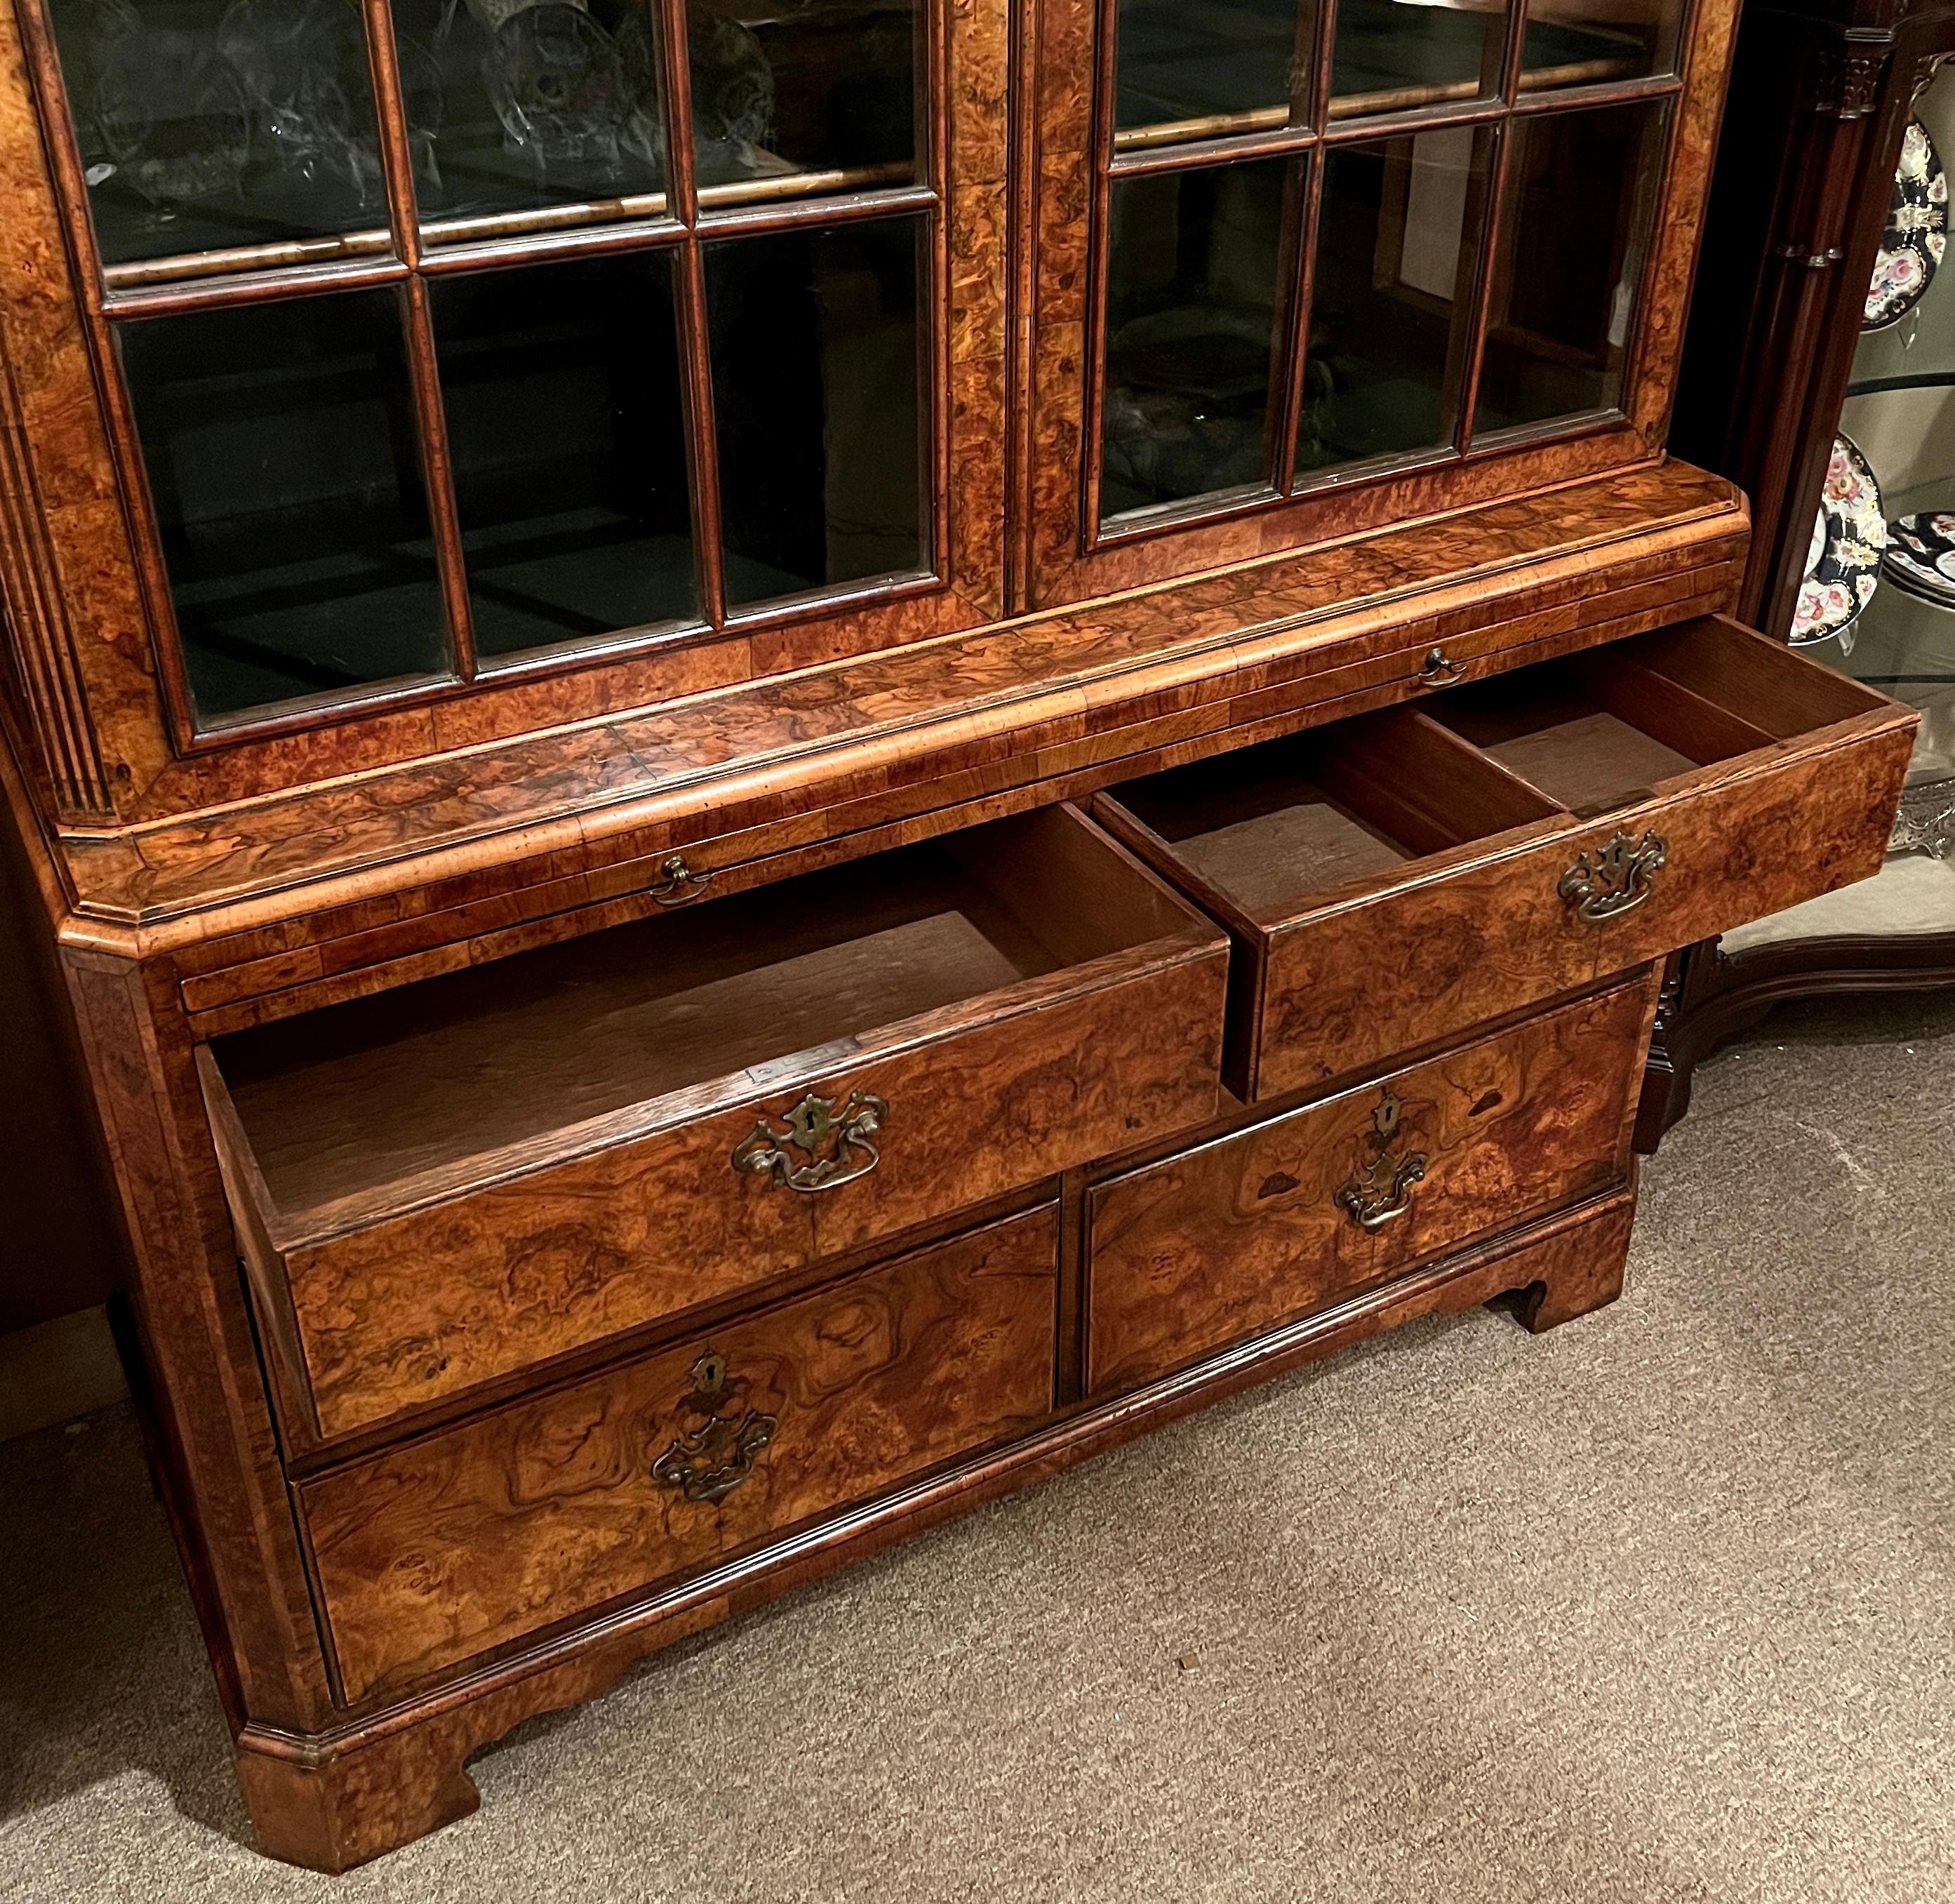 Antique English Burled Walnut Glass Front Cabinet with Writing Slide, Circa 1880 For Sale 1